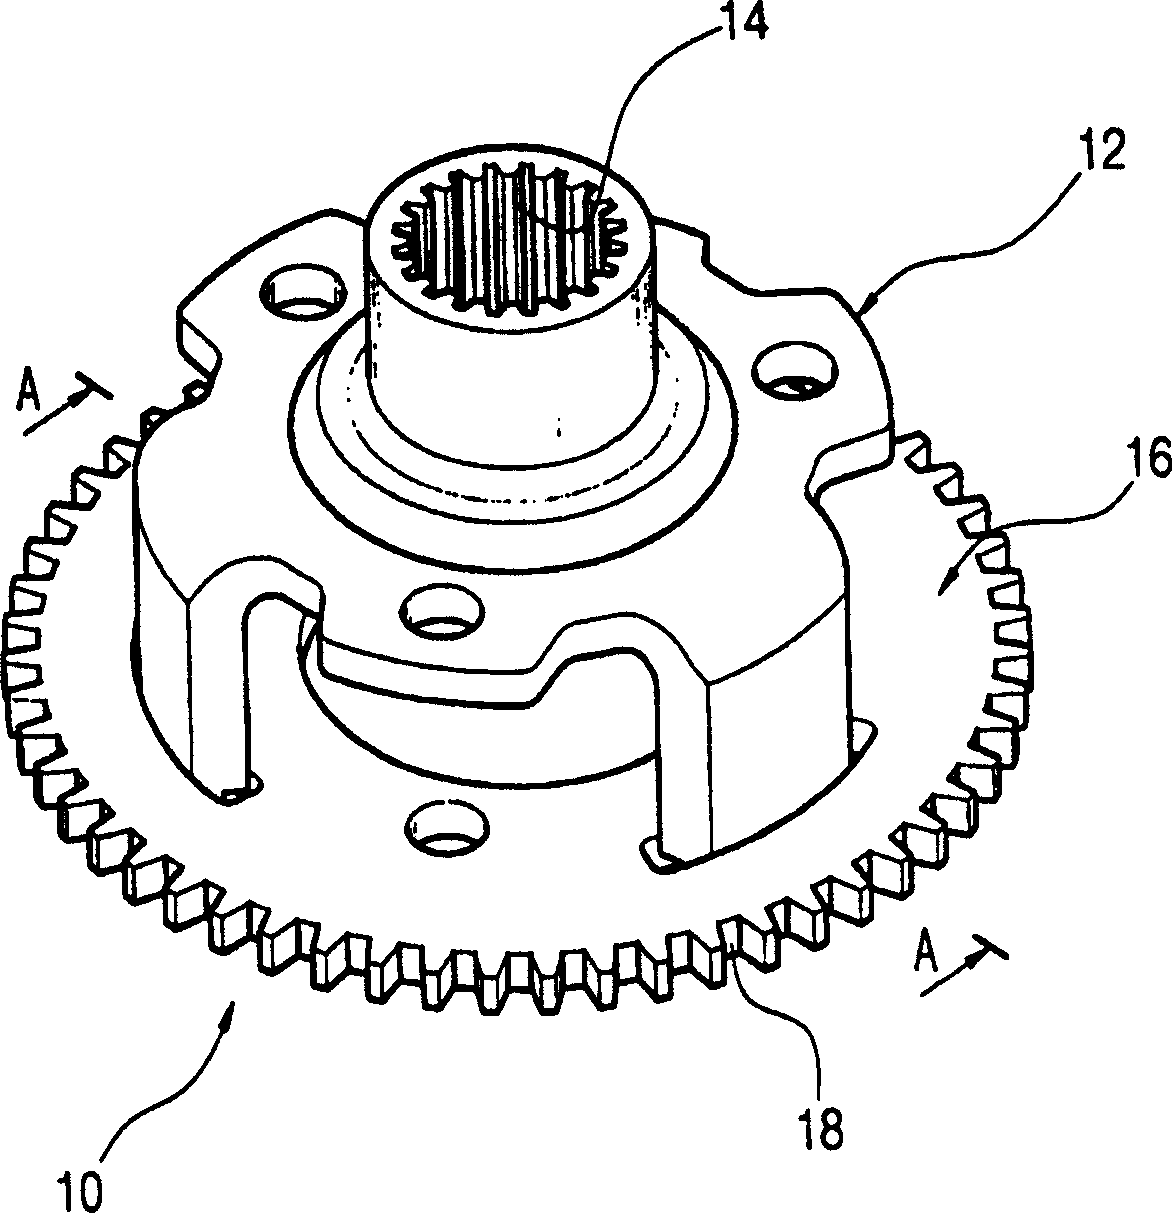 Planet carrier for planetary gear set of automatic transmission